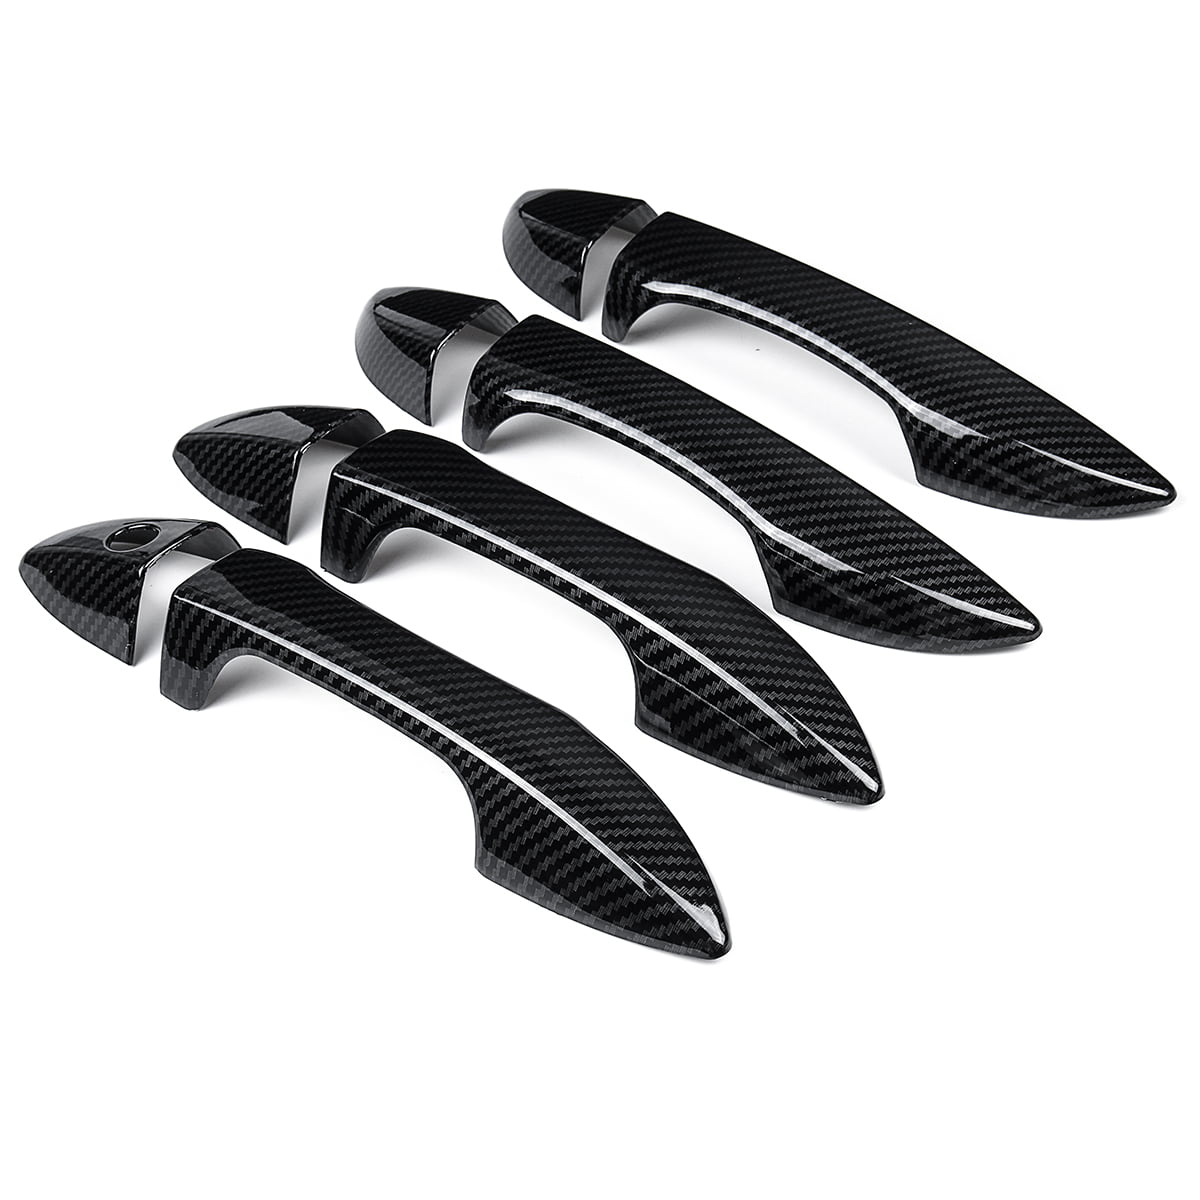 WITHOUT passenger side keyhole EZ Motoring Triple Chrome Plated Door Handle Trim Covers for 2014-2018 Toyota Corolla 4 Doors